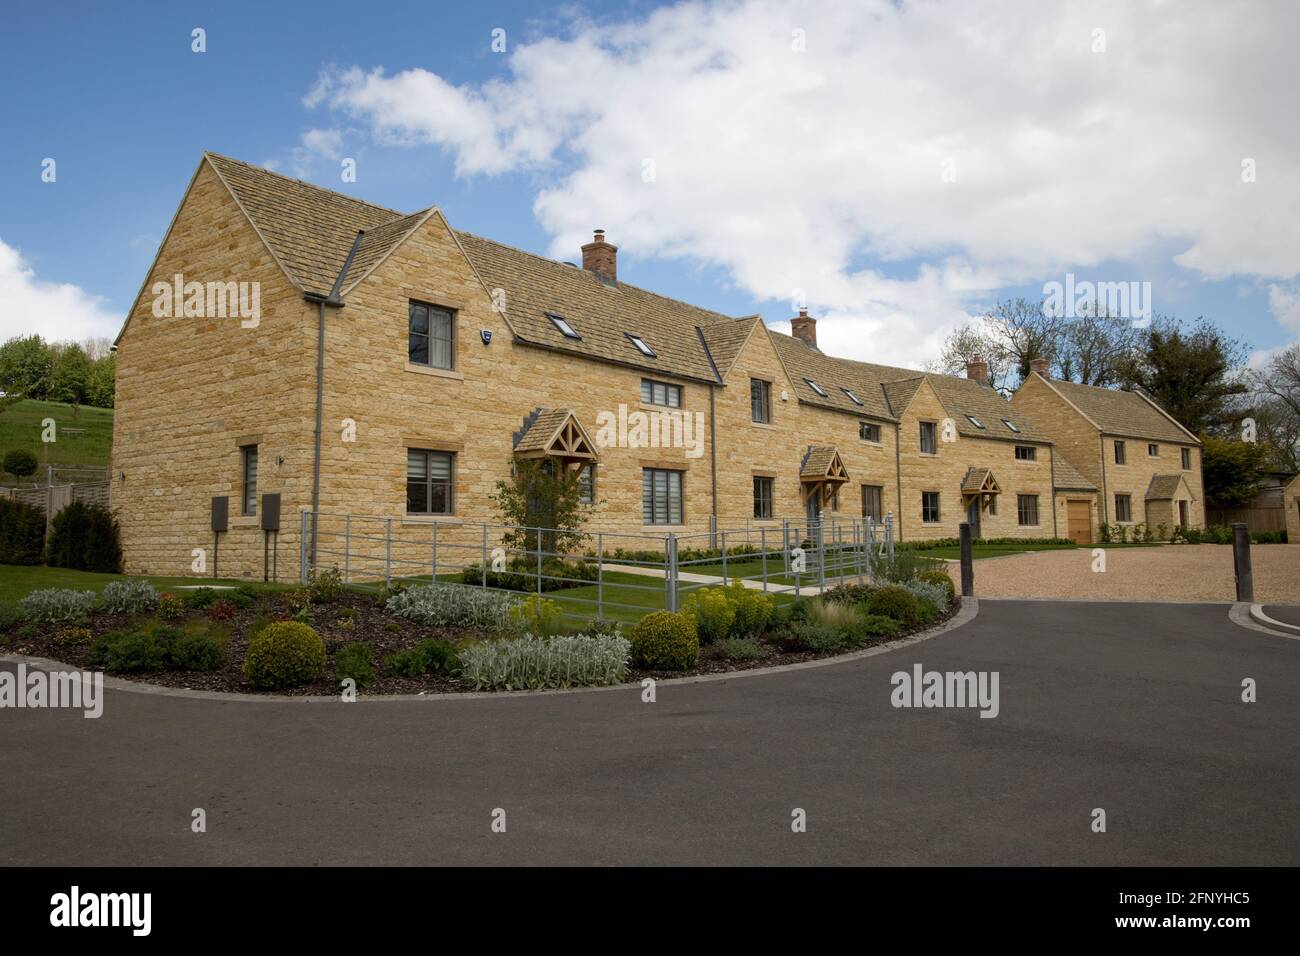 Attractive linked traditional new Cotswood stone houses in rural setting Chipping Campden UK Stock Photo